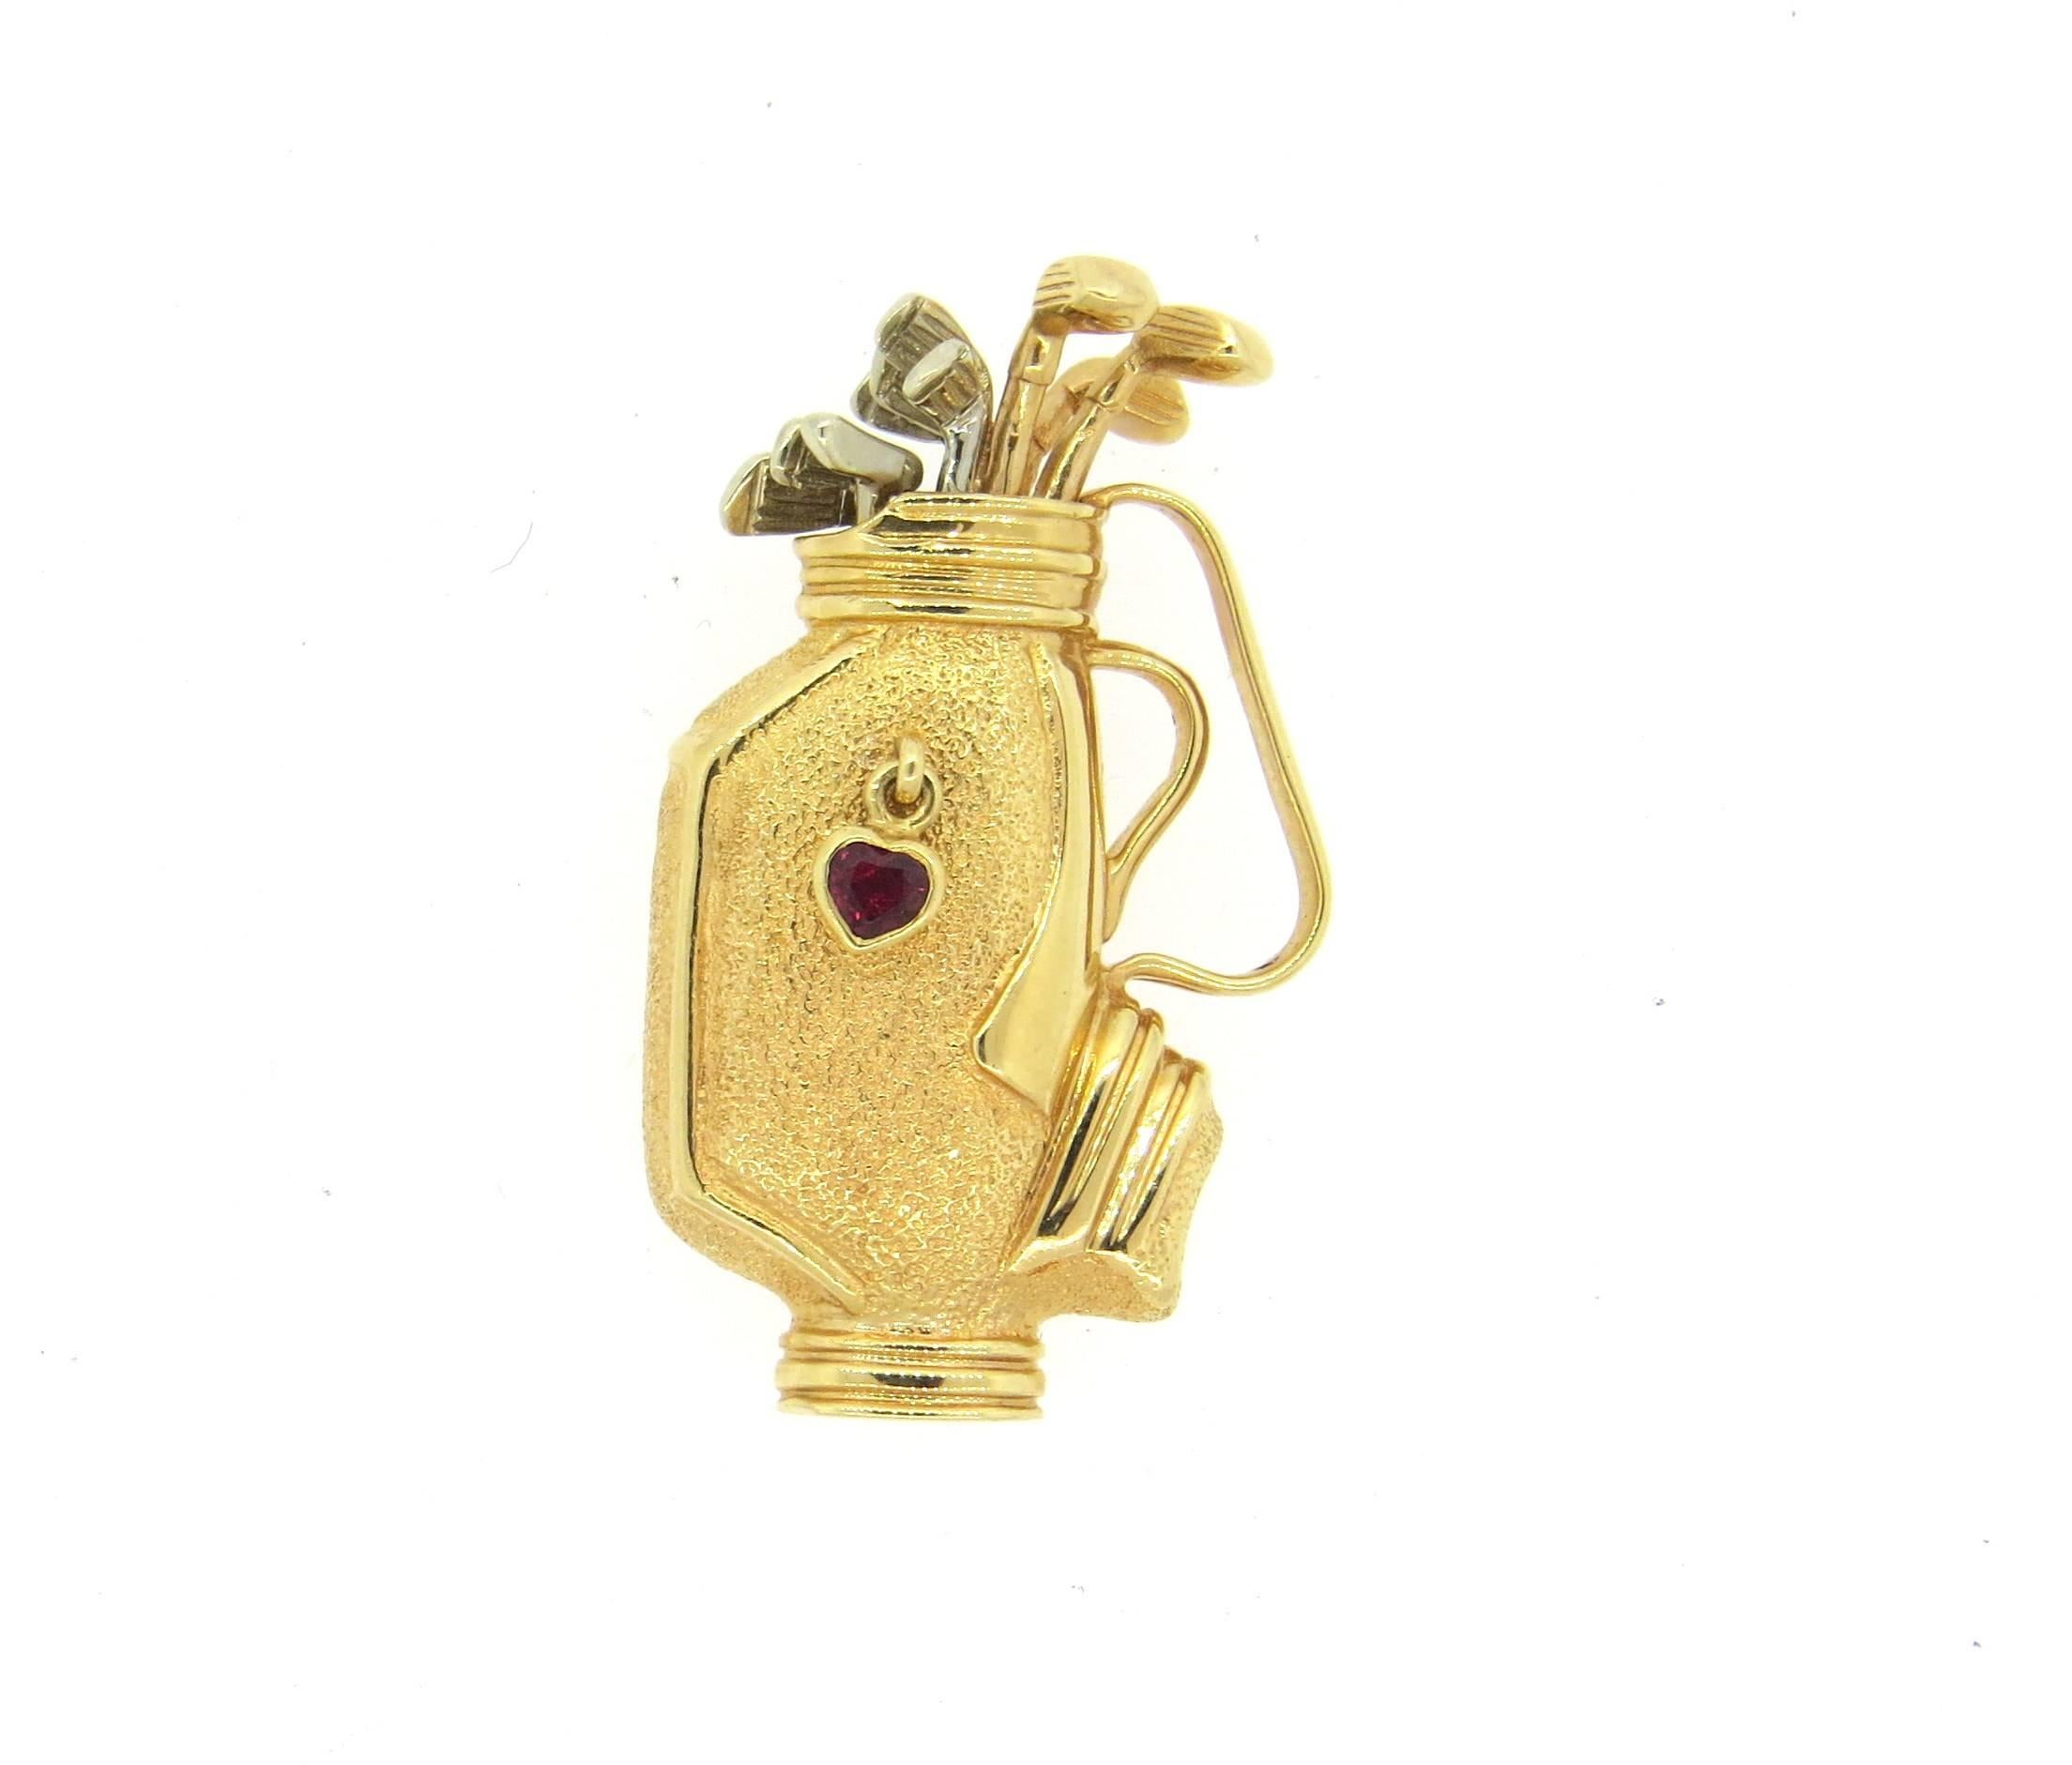 14k yellow and white gold brooch, depicting a golf bag, decorated with garnet heart charm. Brooch measures 38mm x 22mm. Weight of the piece - 11.6 grams